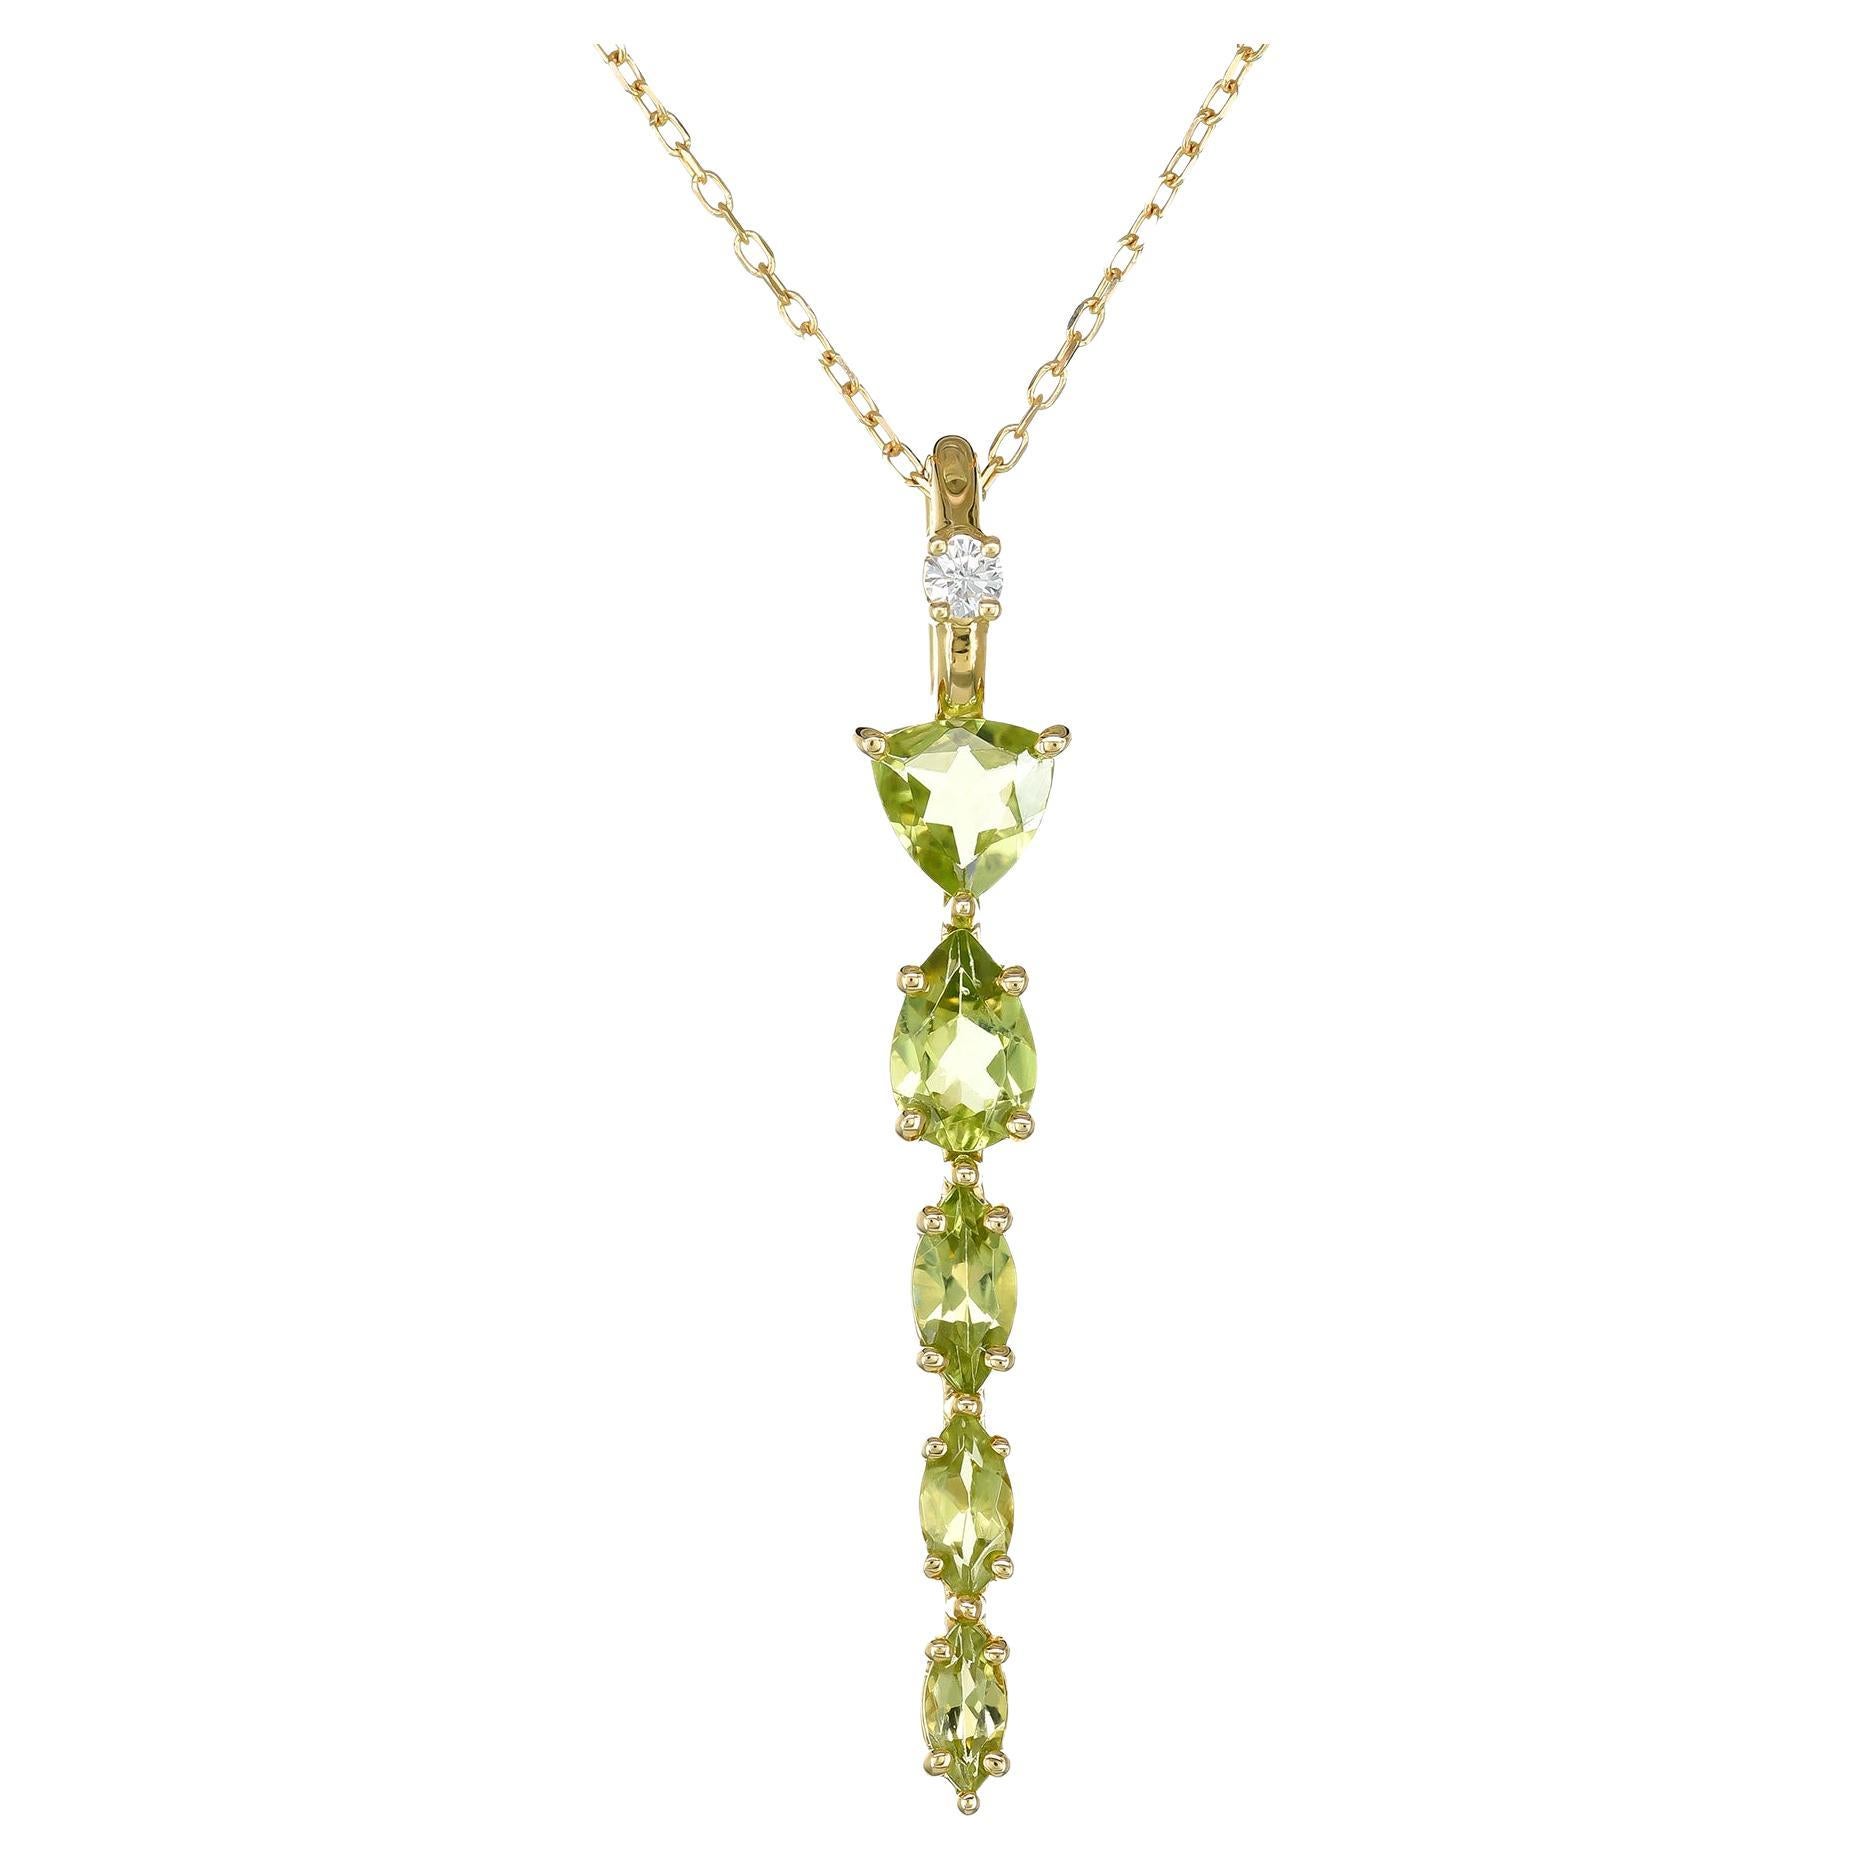 Pendant with 1.41 carats Peridot Diamonds set in 14K Yellow Gold For Sale